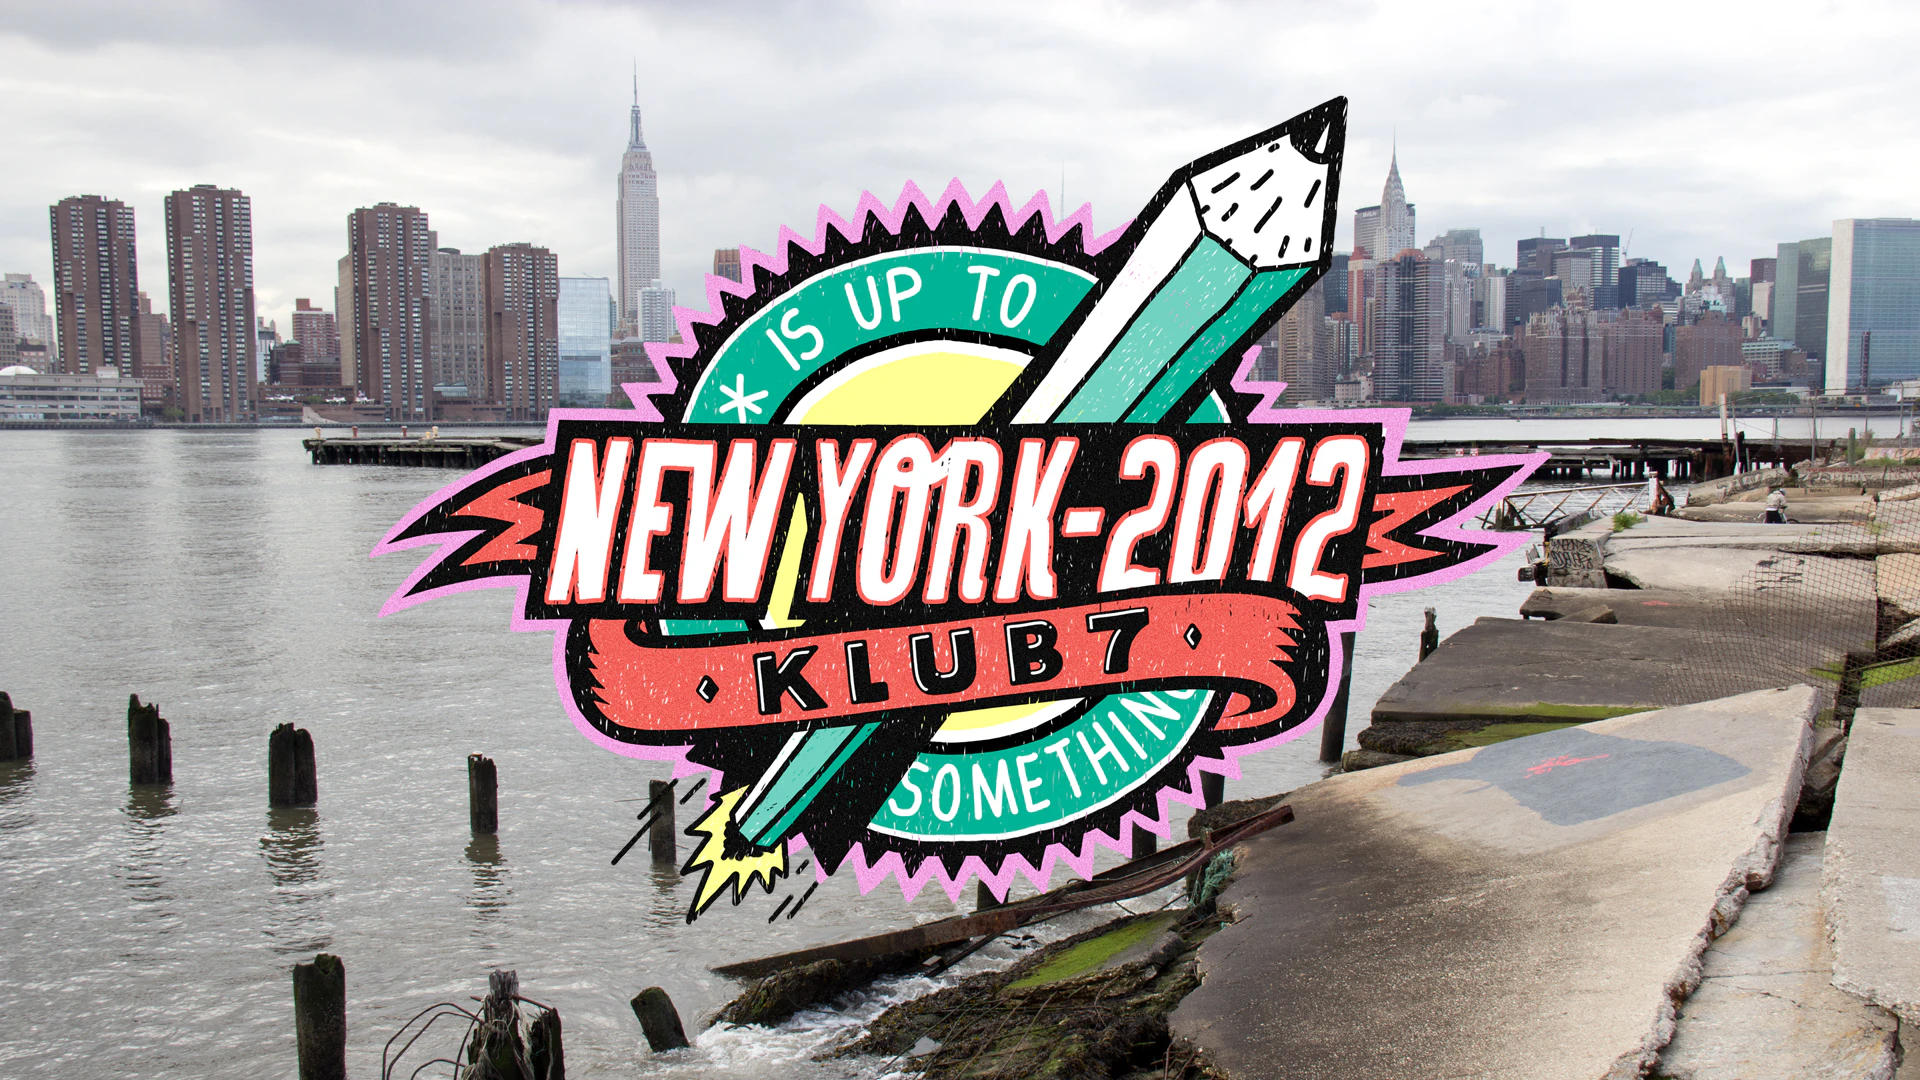 KLUB7 is up to Something - New York 2012